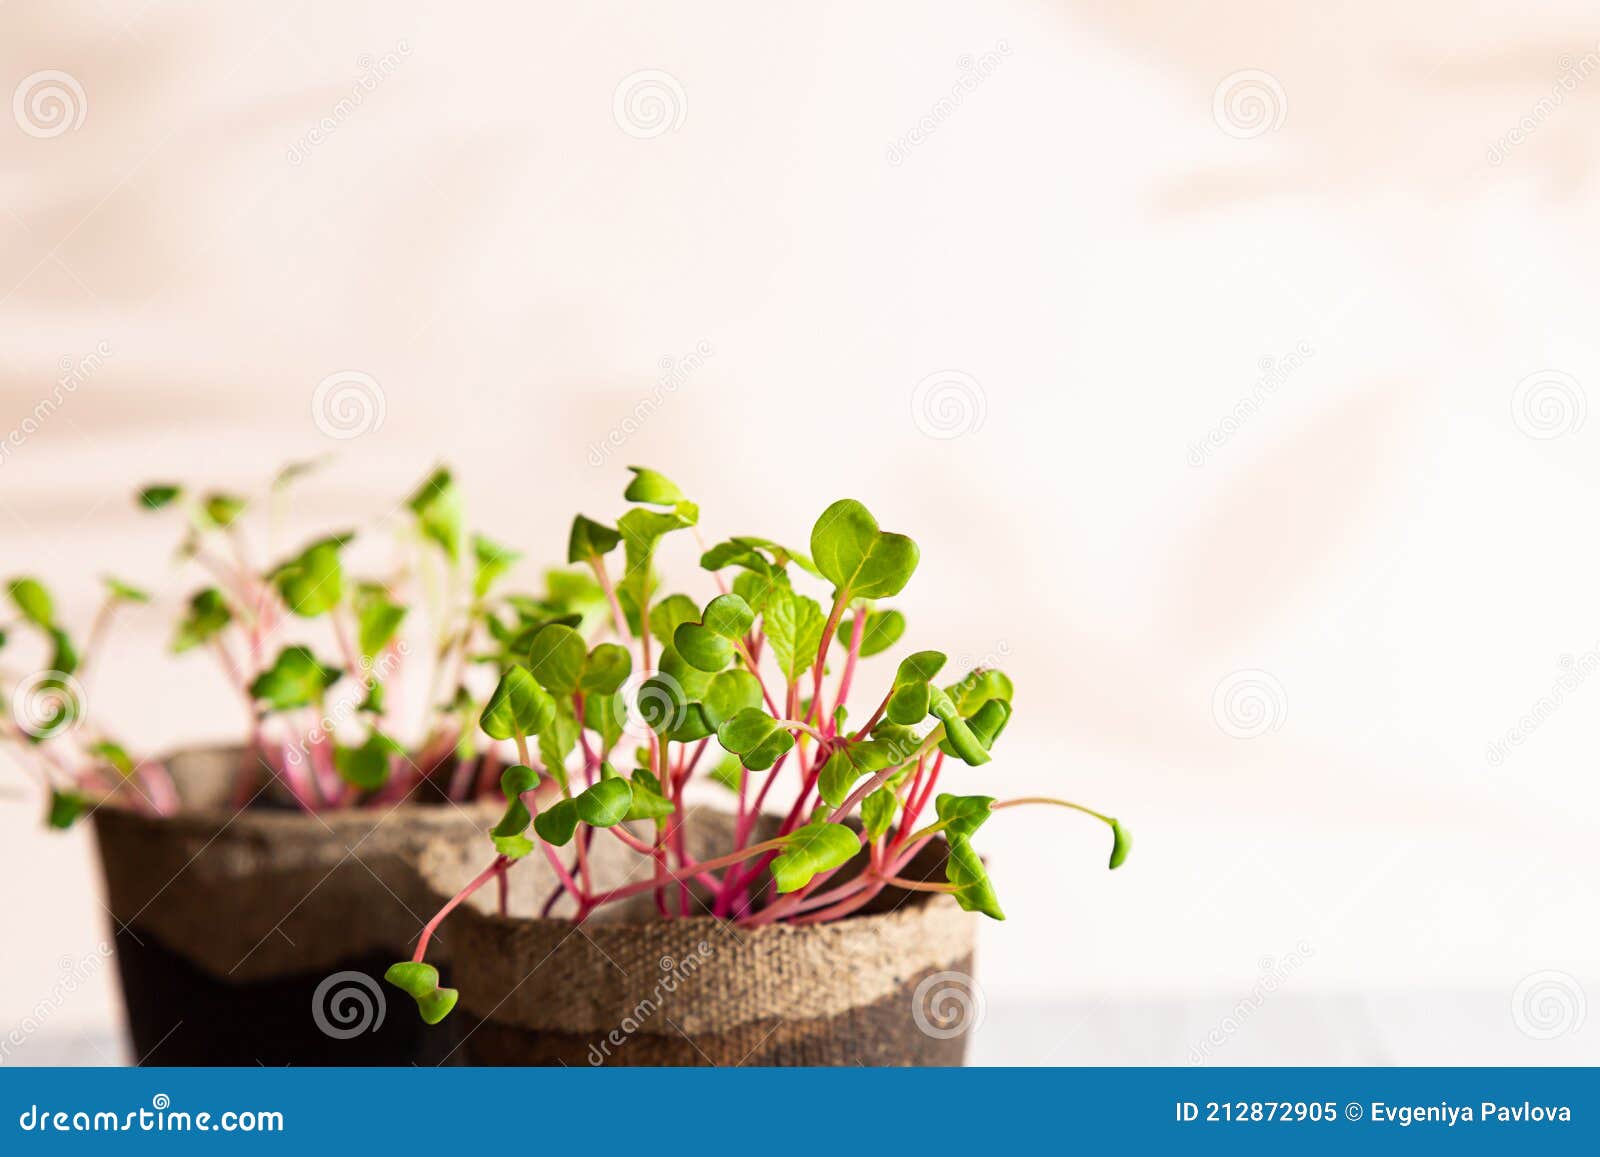 close-up of a radish microgreen. self-cultivation of micro-greenery at home. growing seedlings. organic farming,